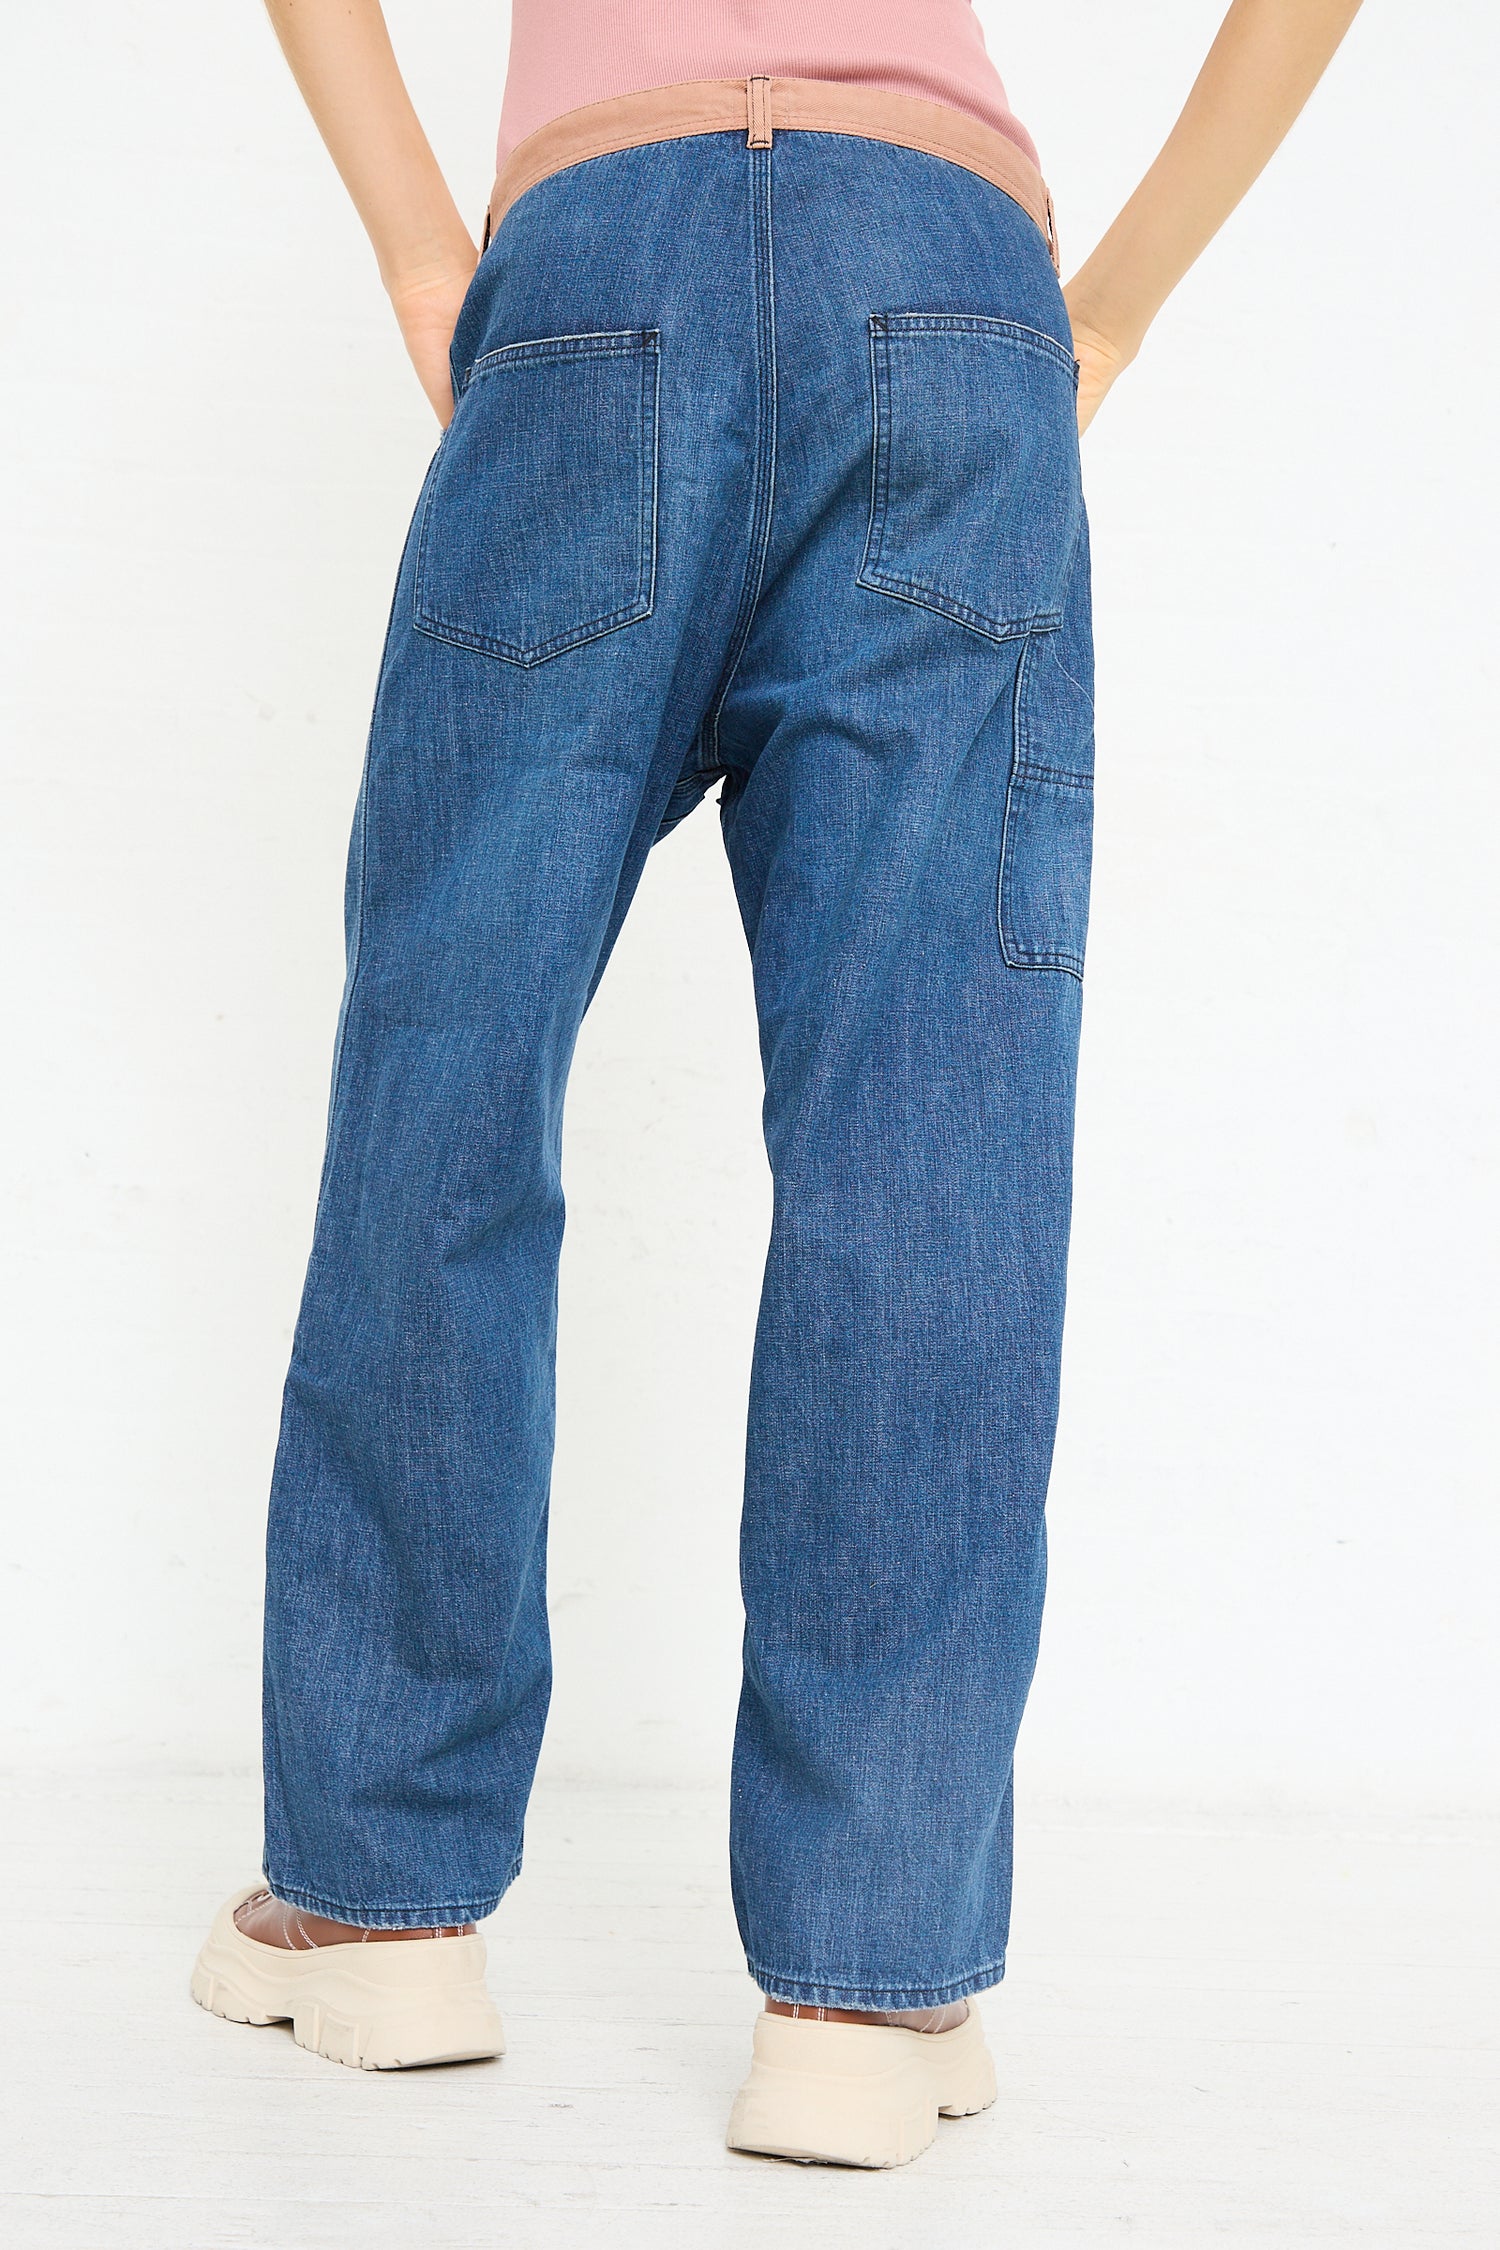 A person from behind wearing blue Chimala selvedge denim carpenter pants and white shoes.